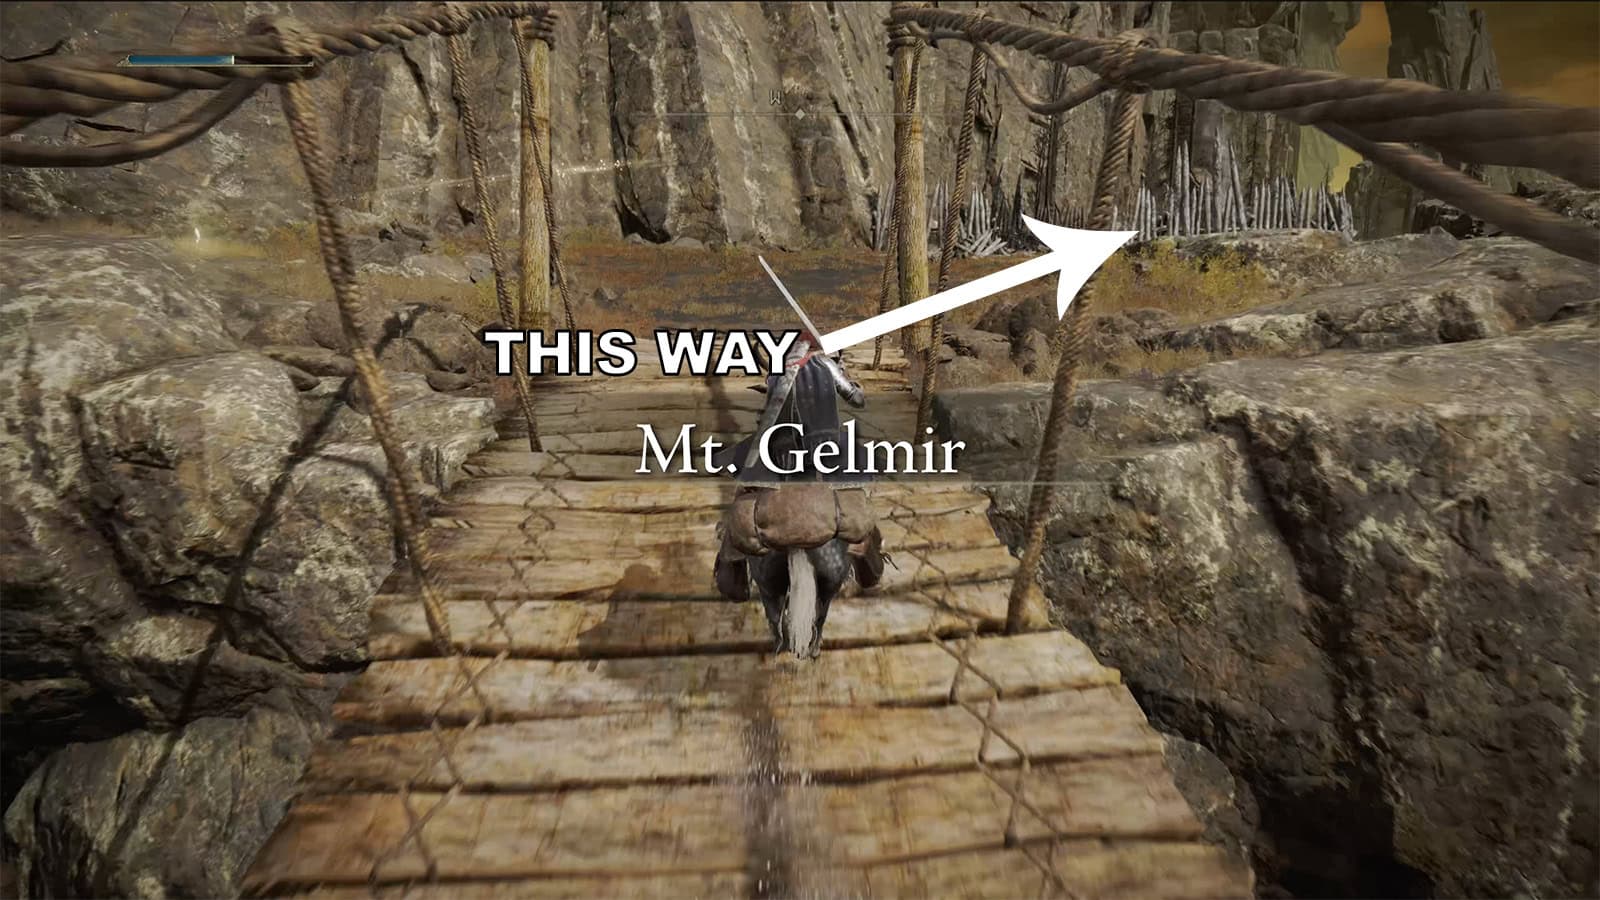 An image of an Elden Ring playable character crossing a roped bridge and entering Mt Gelmir